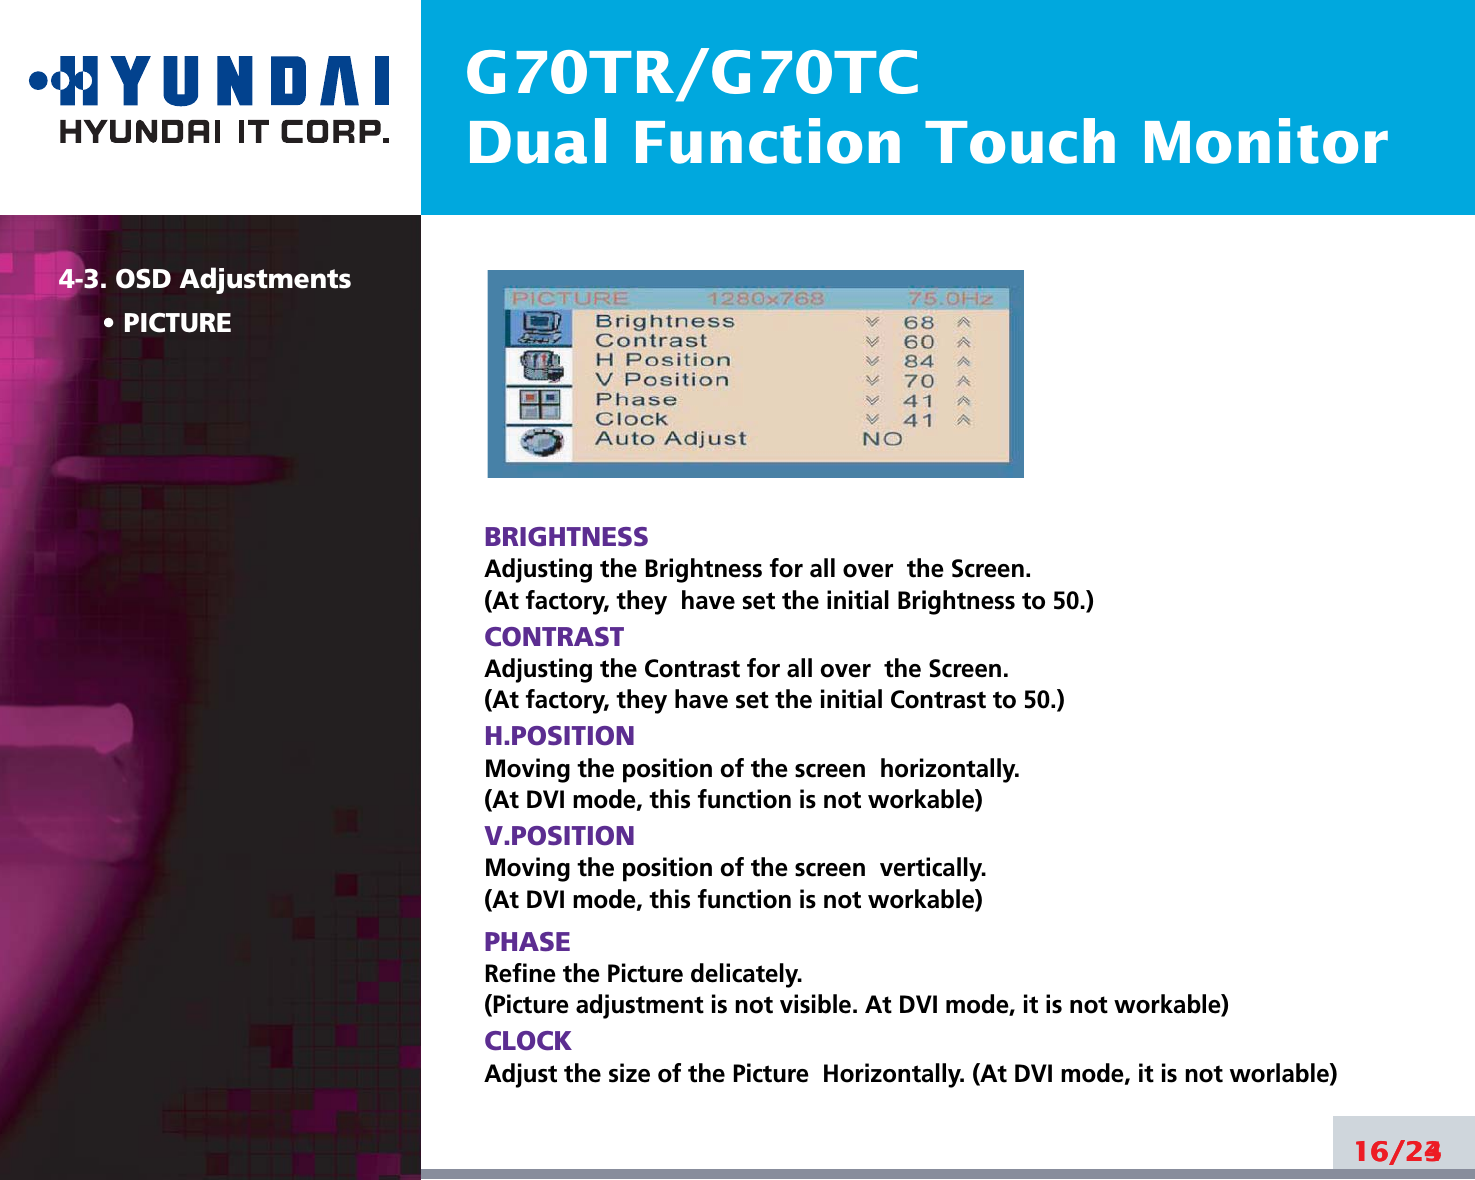 G70TR/G70TCDual Function Touch Monitor16/244-3. OSD AdjustmentsPICTUREBRIGHTNESSAdjusting the Brightness for all over  the Screen.(At factory, they  have set the initial Brightness to 50.)CONTRASTAdjusting the Contrast for all over  the Screen.(At factory, they have set the initial Contrast to 50.)H.POSITIONMoving the position of the screen  horizontally. (At DVI mode, this function is not workable)V.POSITIONMoving the position of the screen  vertically. (At DVI mode, this function is not workable)PHASERefine the Picture delicately. (Picture adjustment is not visible. At DVI mode, it is not workable)CLOCKAdjust the size of the Picture  Horizontally. (At DVI mode, it is not worlable)16/23